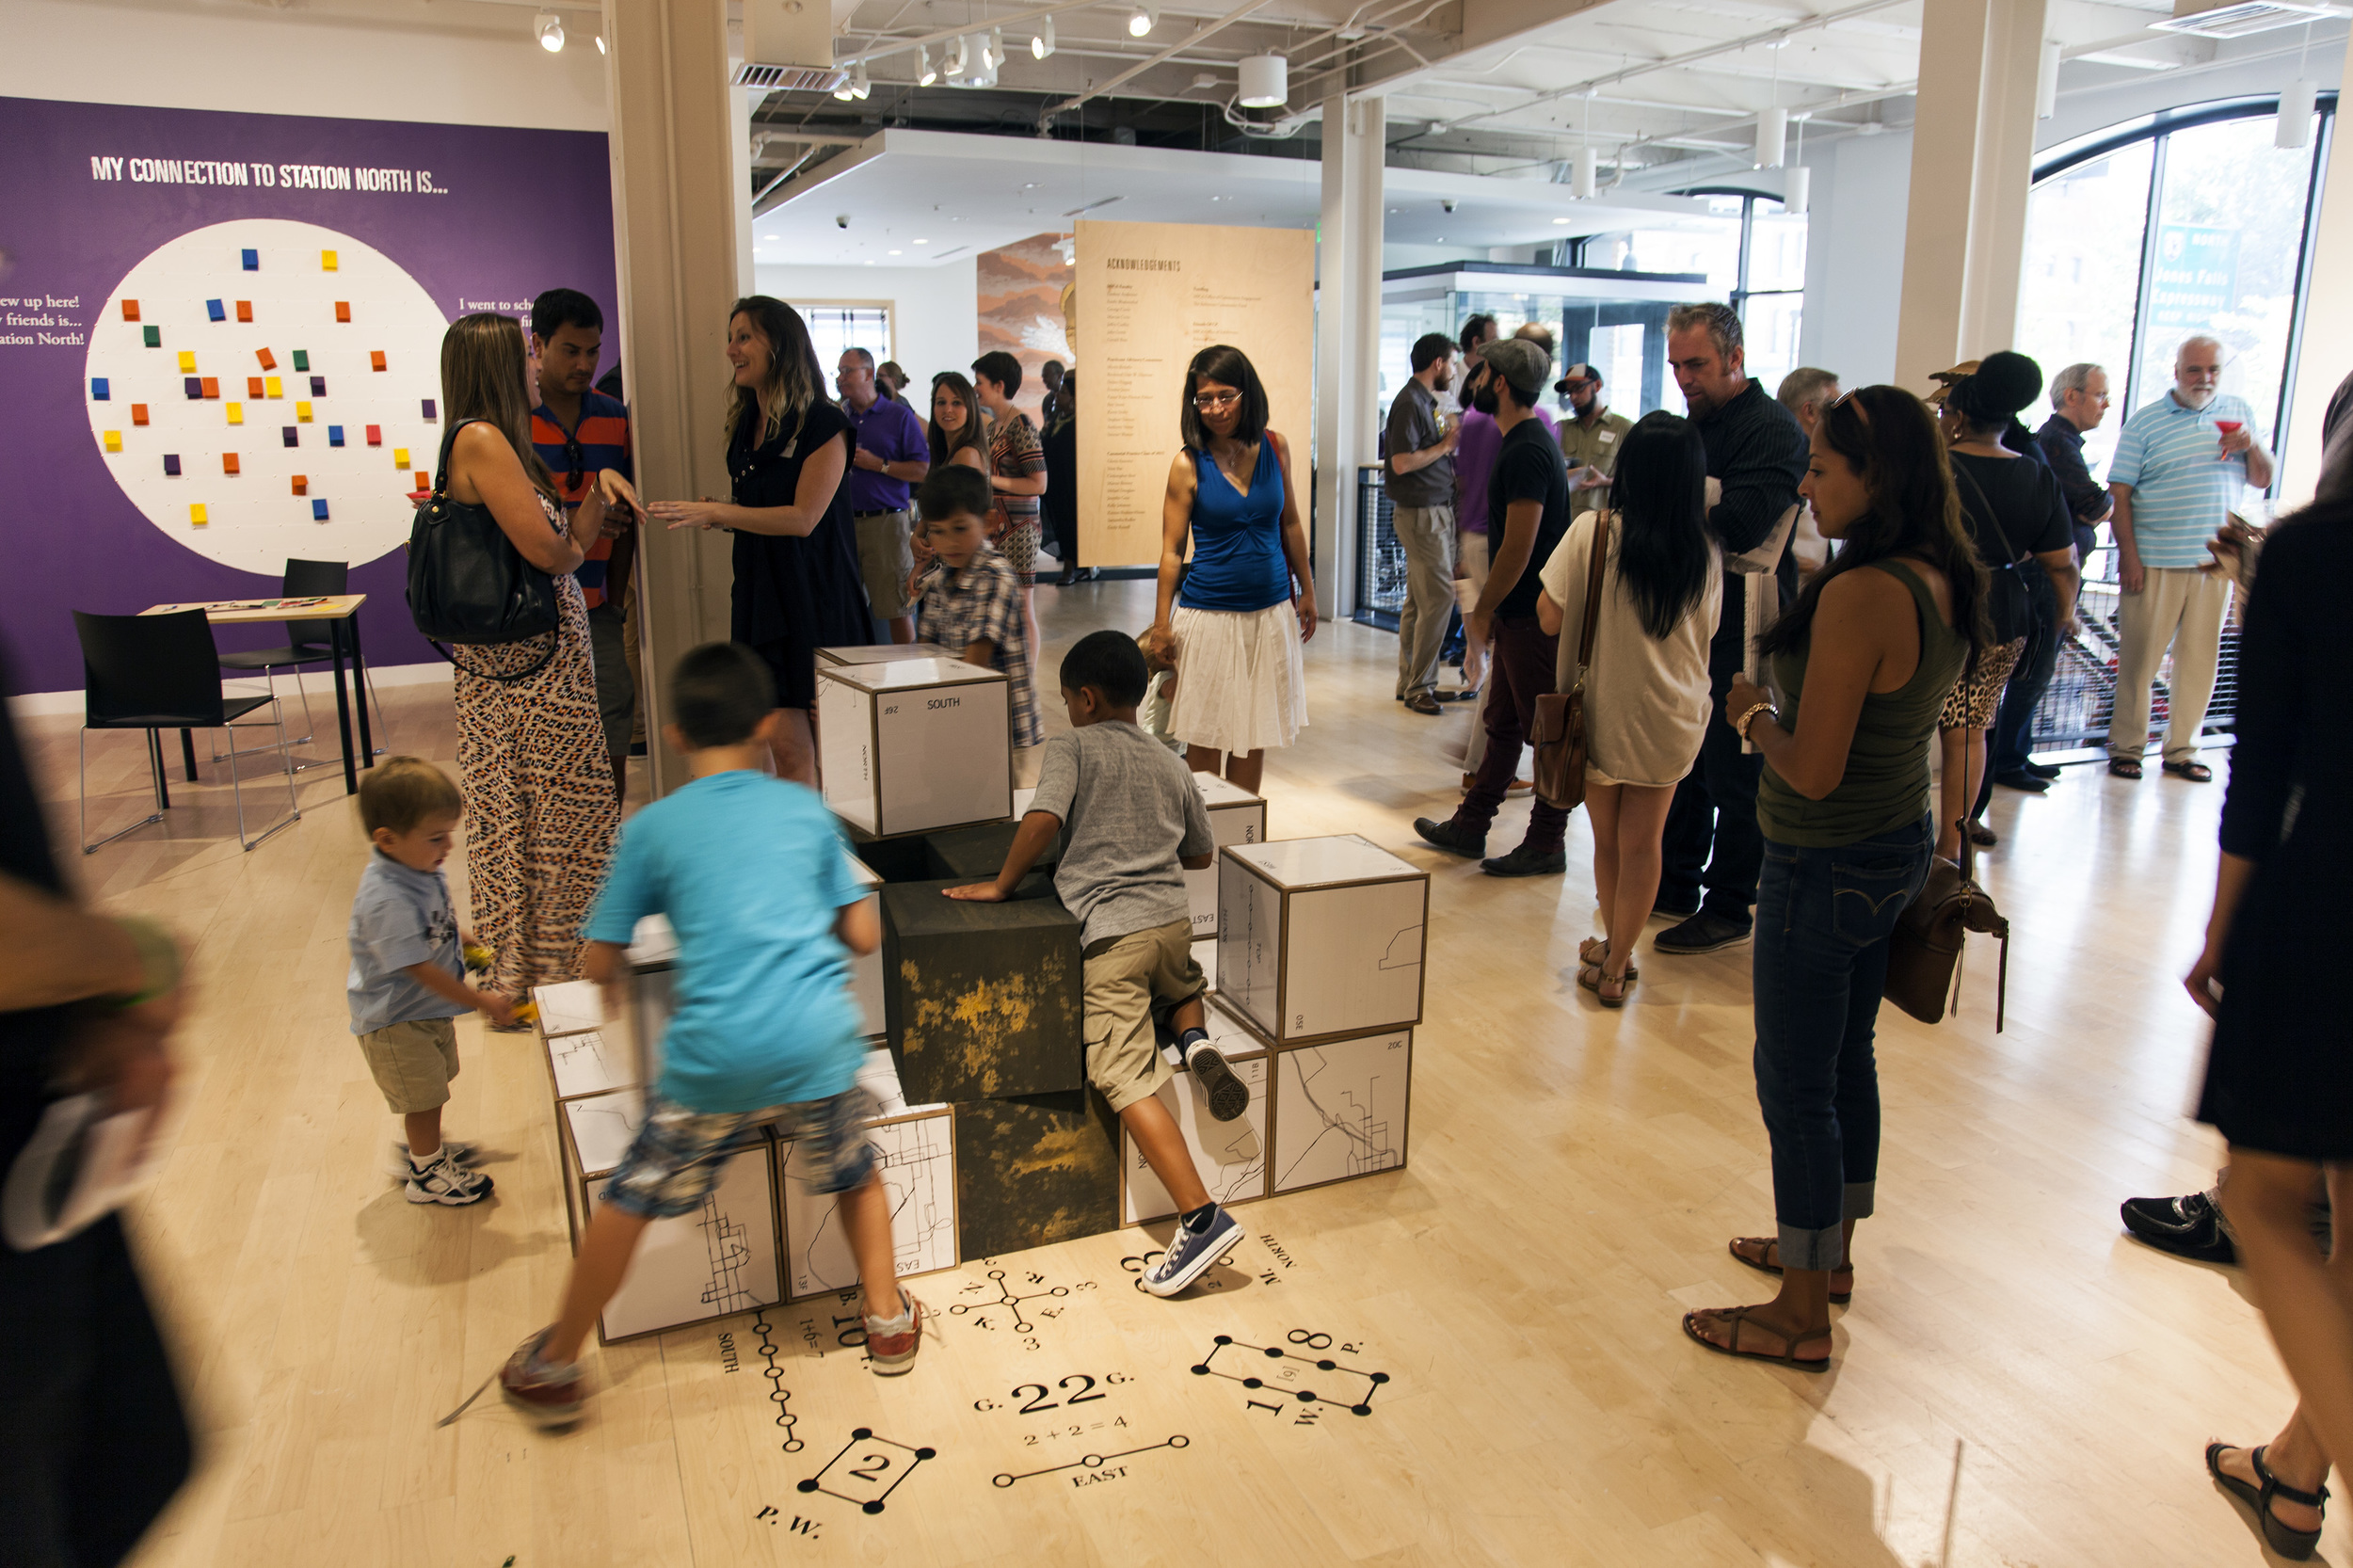   The cubes were another interactive part of the exhibition, visitors moved them around to make new shapes.  